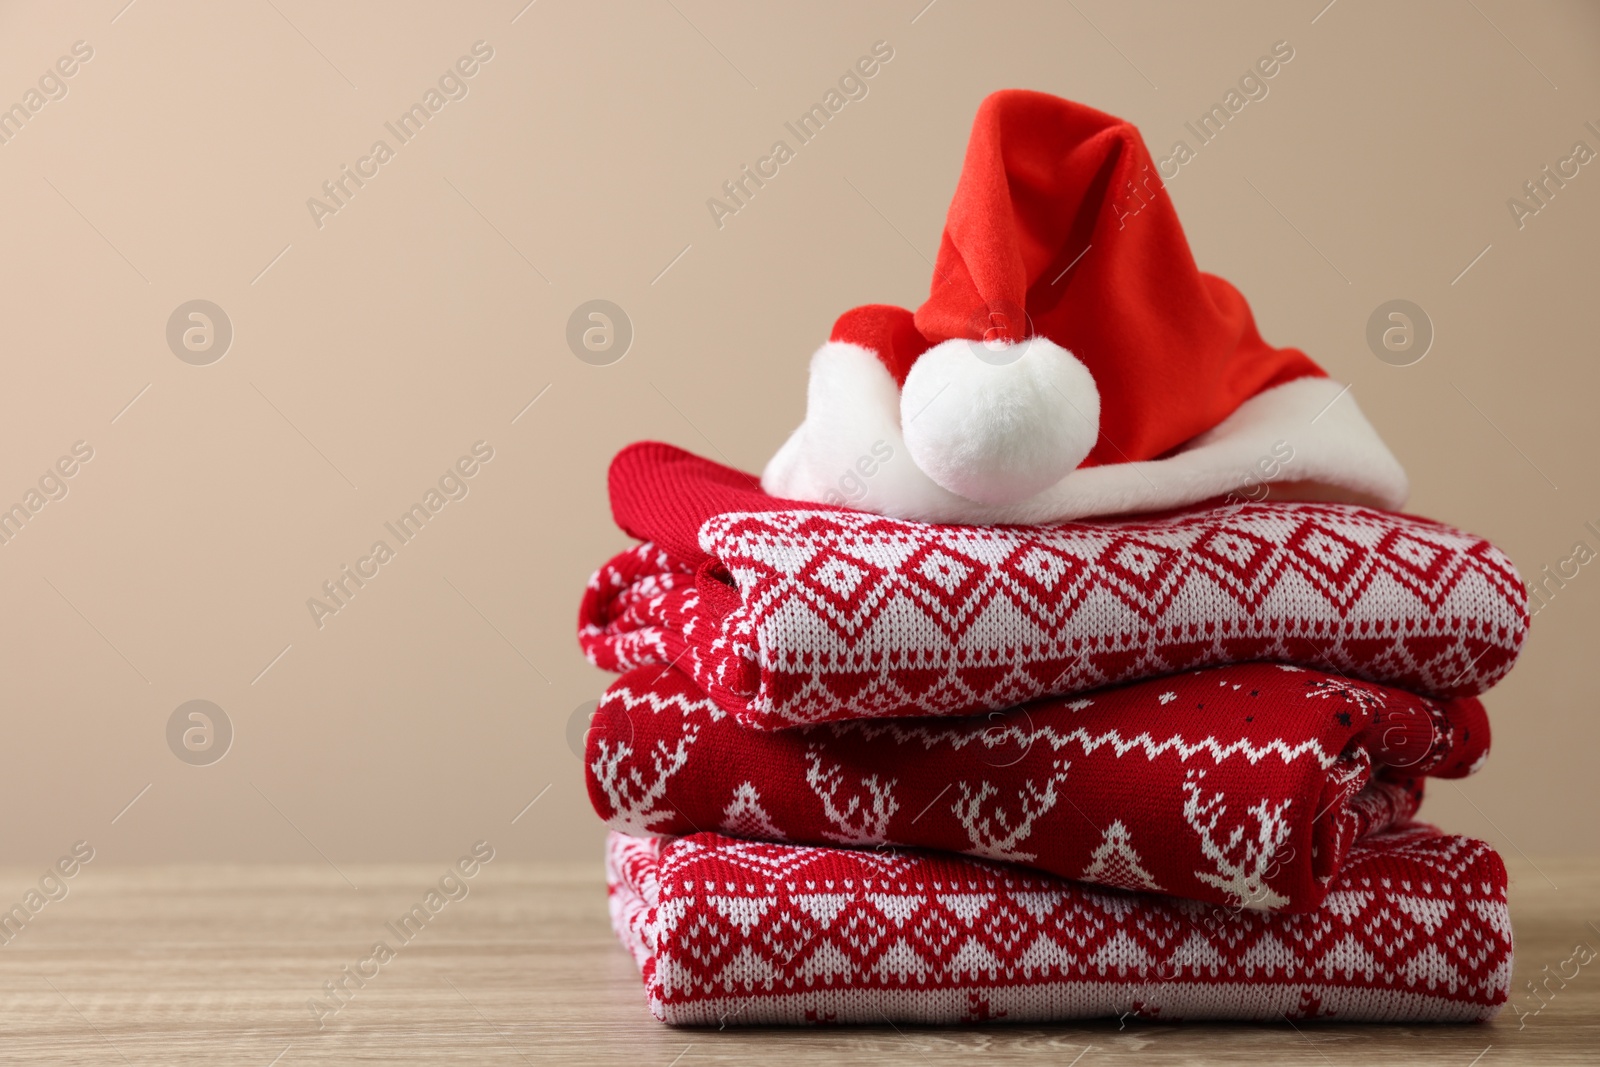 Photo of Stack of different Christmas sweaters and Santa hat on wooden table against beige background, space for text